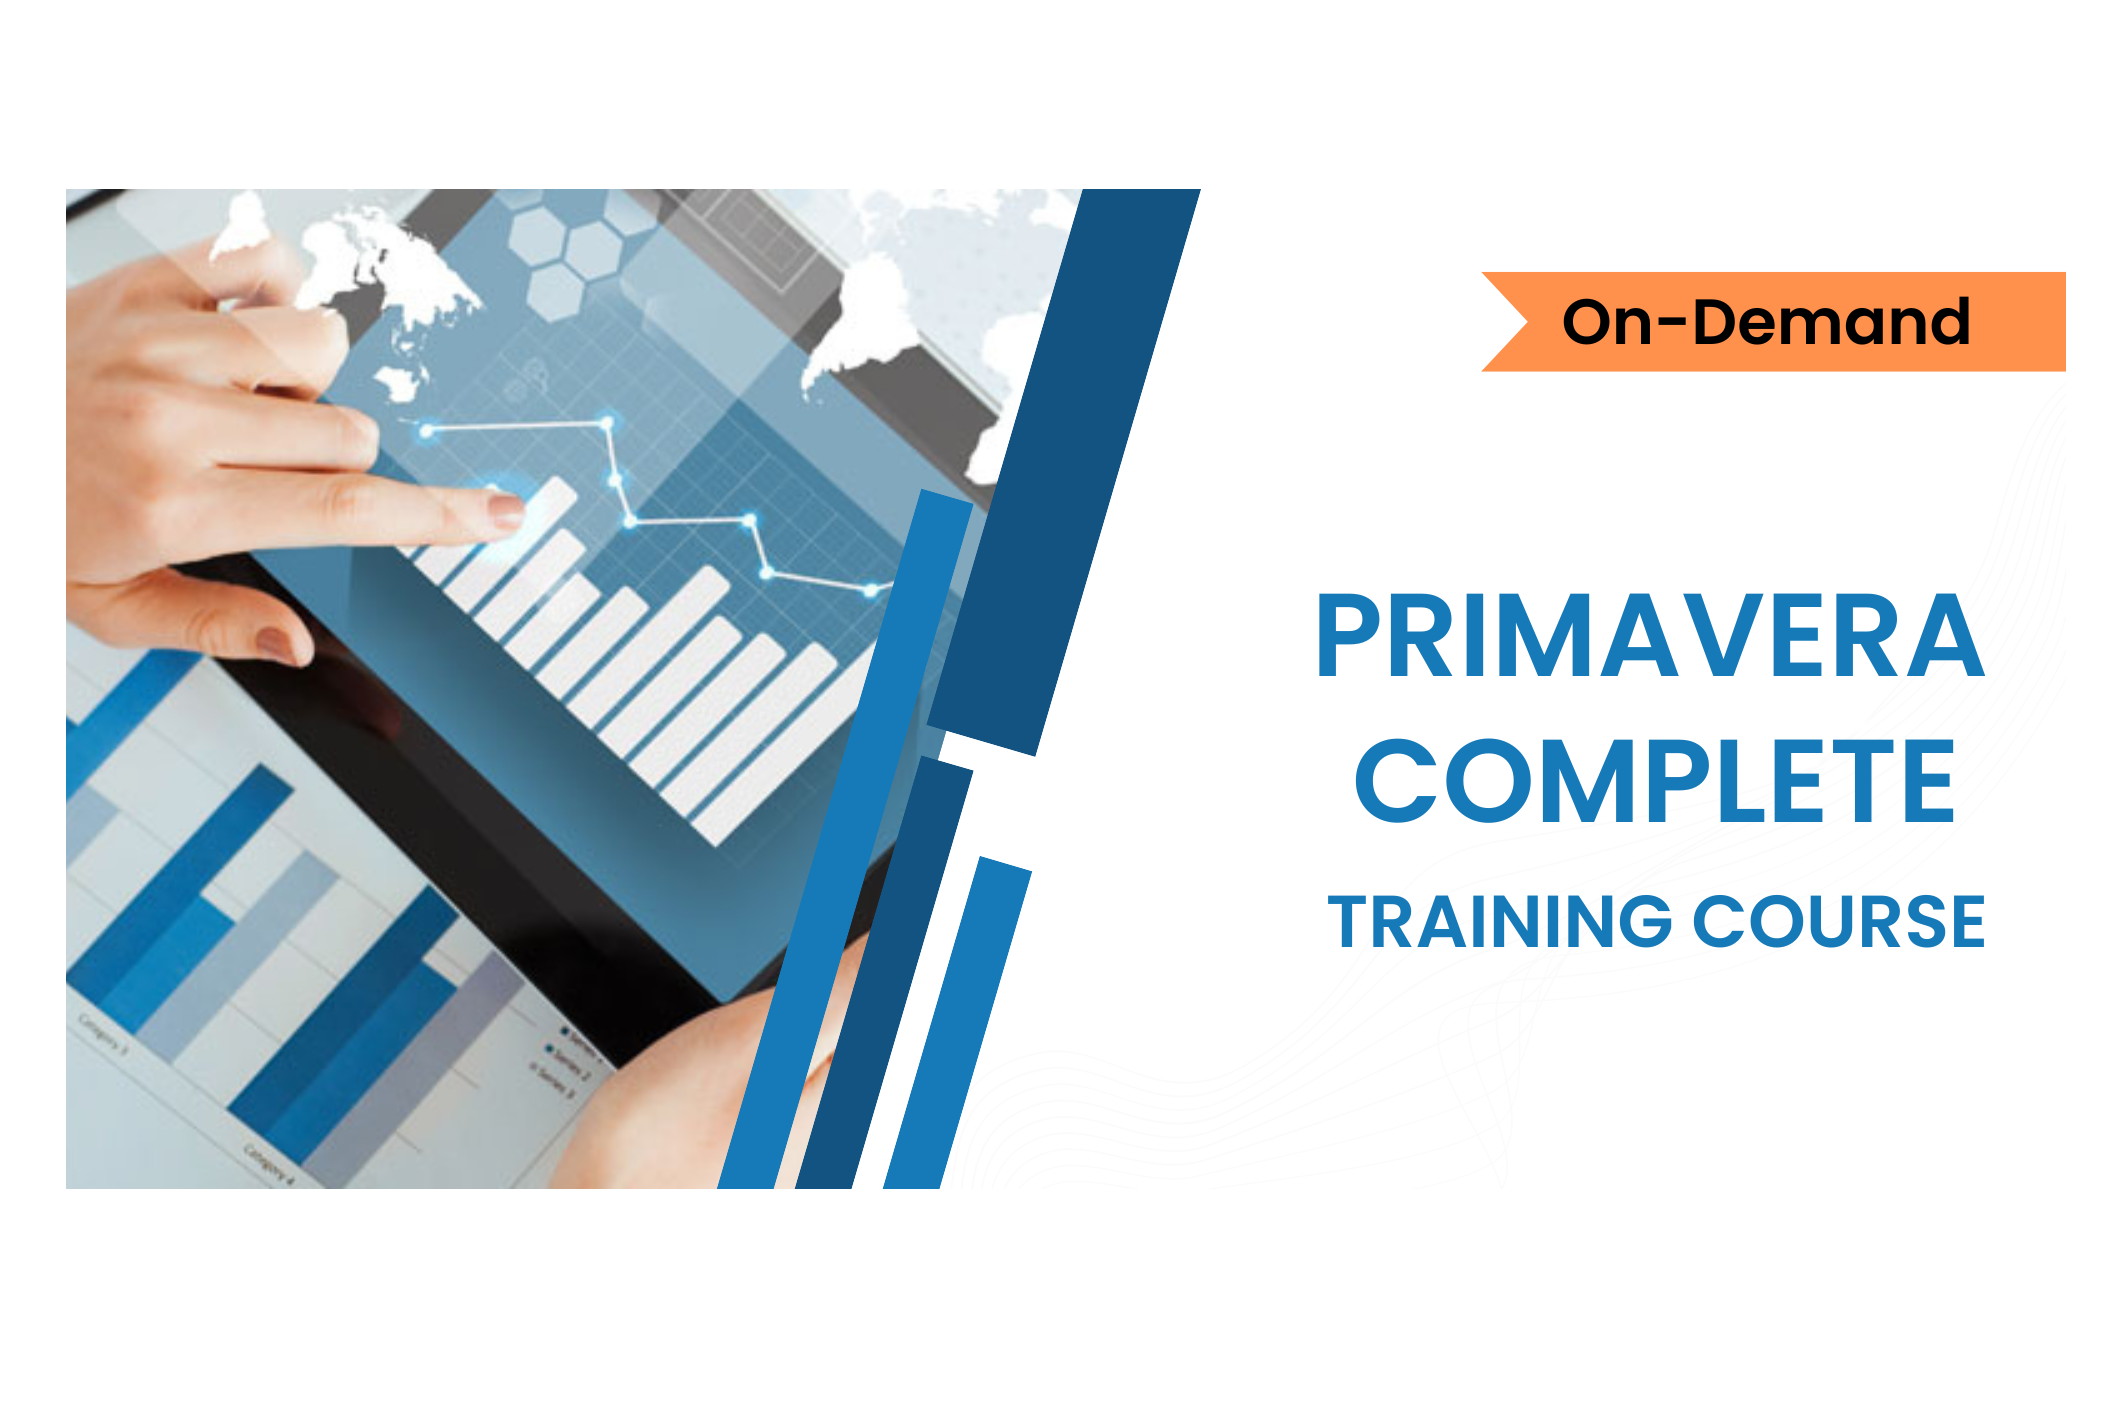 PMP CERTIFICATION TRAINING IN CHENNAI